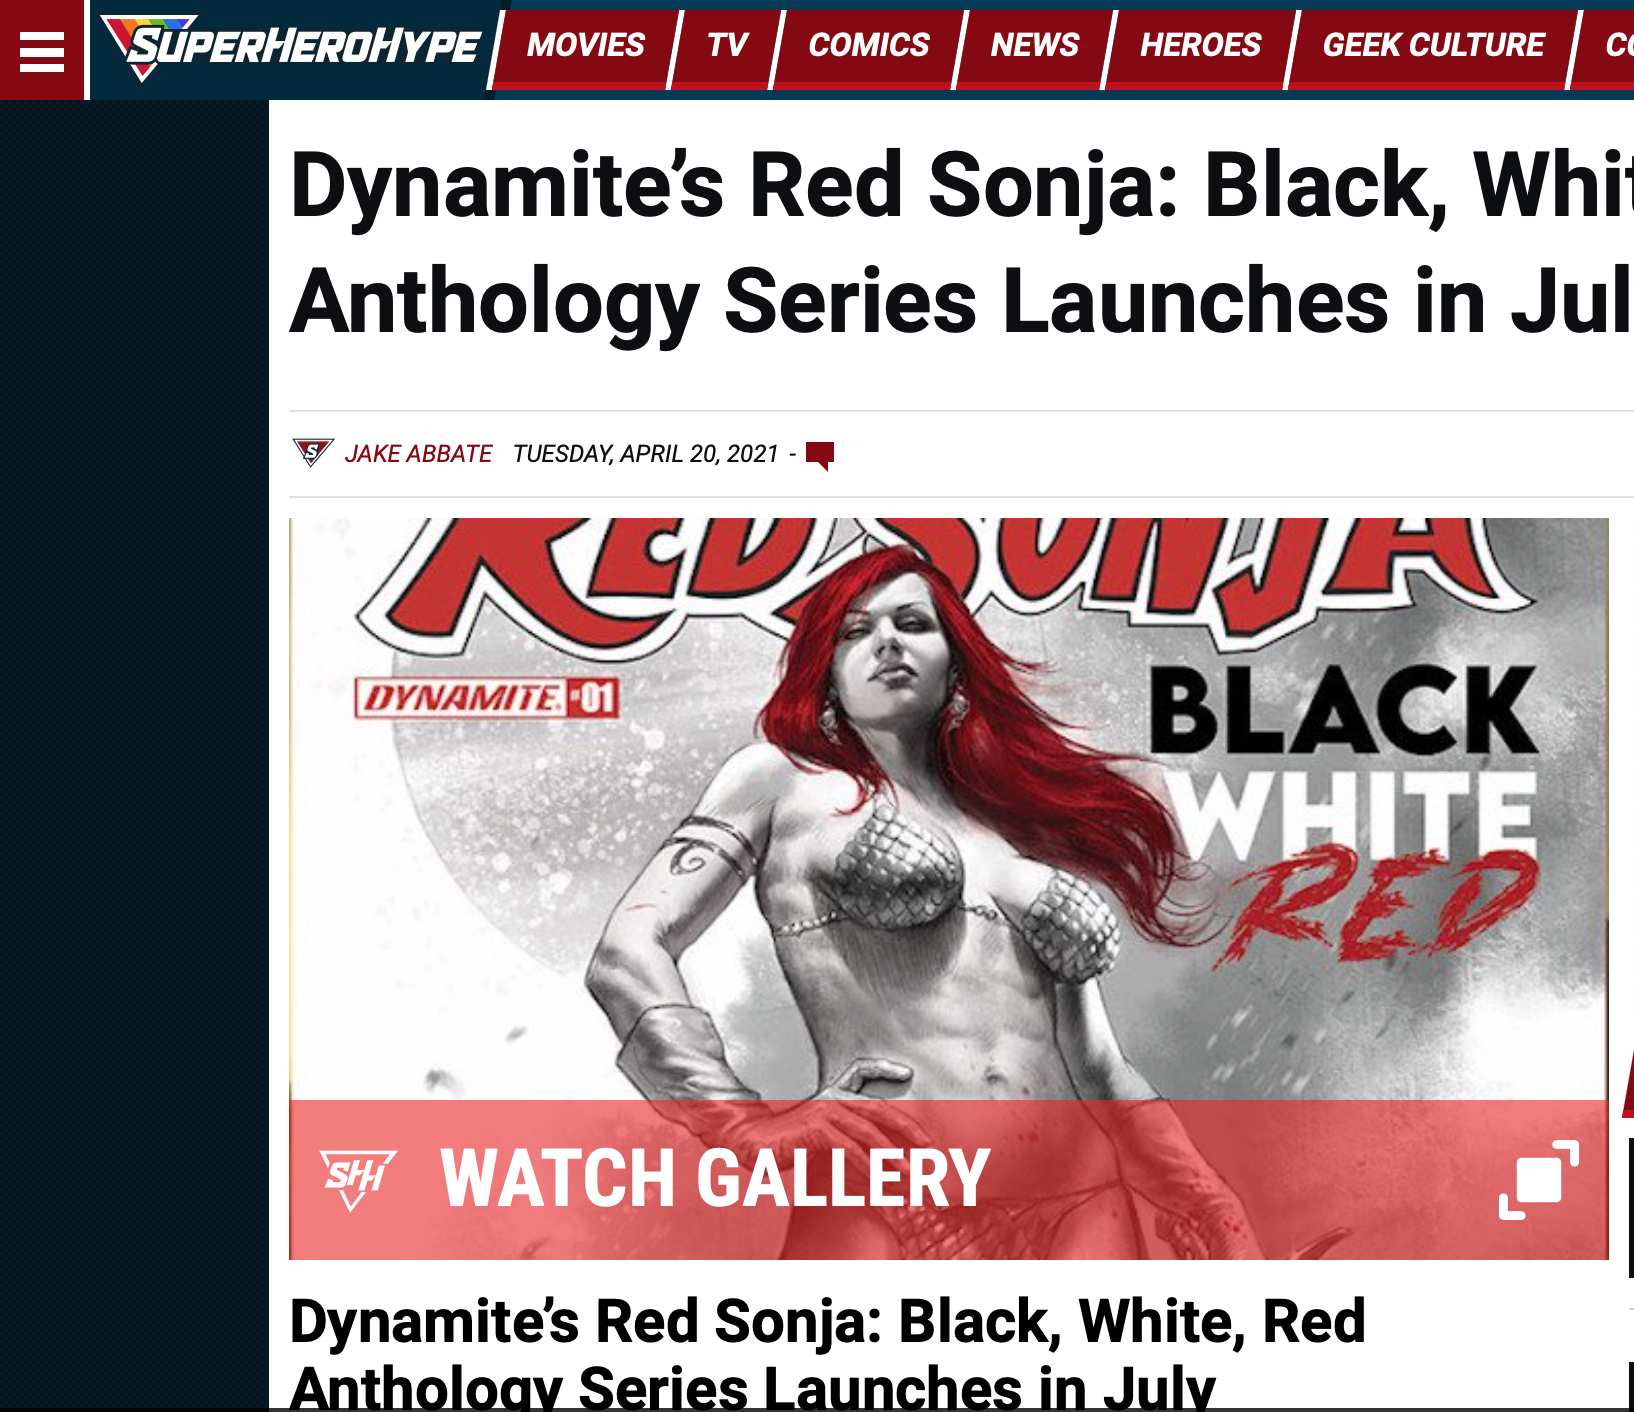 Dynamite’s Red Sonja: Black, White, Red Anthology Series Launches in July